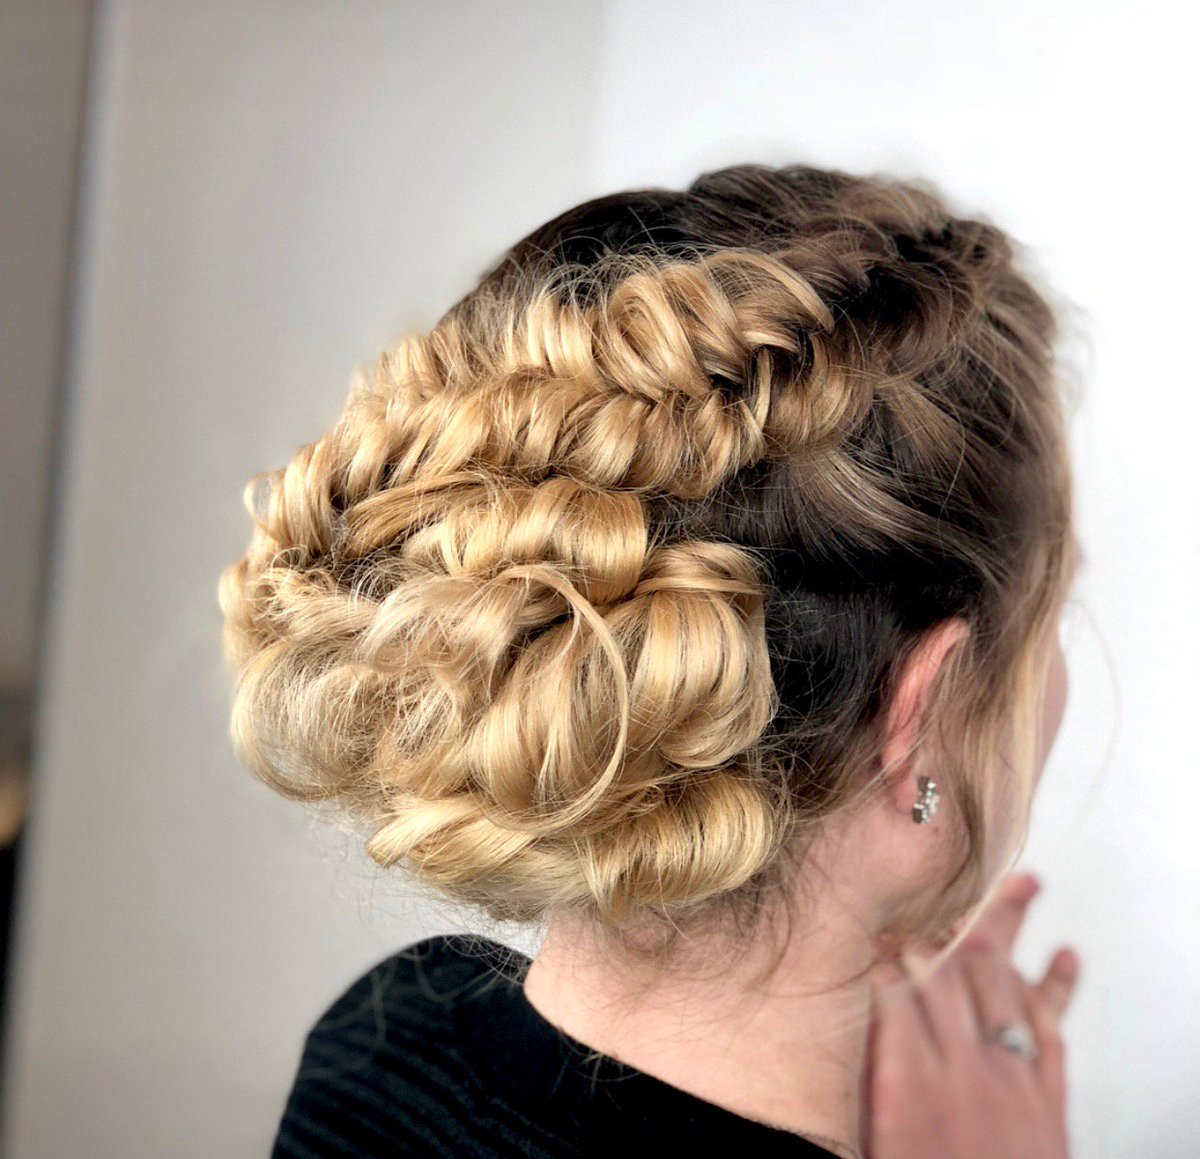 Raise your hand if you are obsessed with #braids 🙋‍♀️ @ robidoux_jenna is giving us major #promhair ~vibes~ 

#prom #weddinghair #promupdo #updo #pmtstemecula #creativehairstyle #futureprofessionalfriday #hairinspo #upstyle